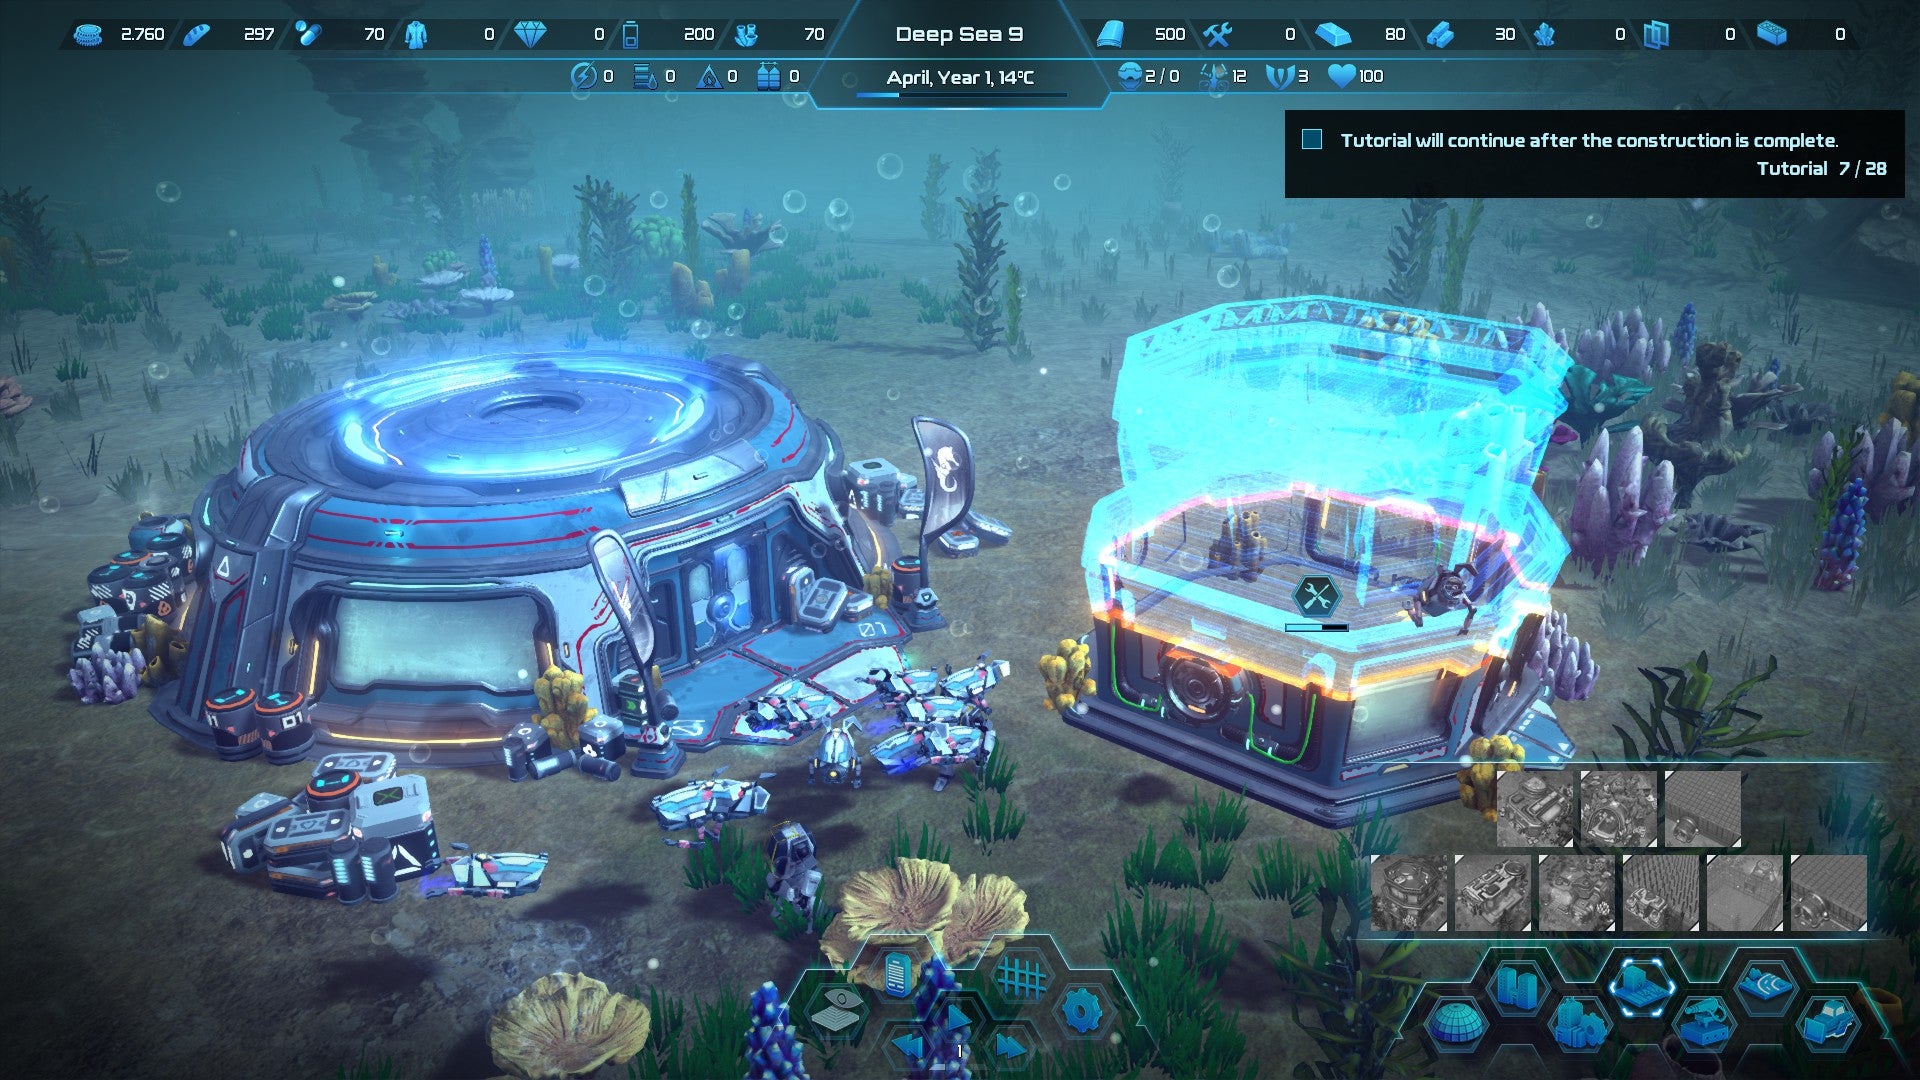 An Aquatico screenshot showing two futuristic-looking sub-sea buildings being constructed.